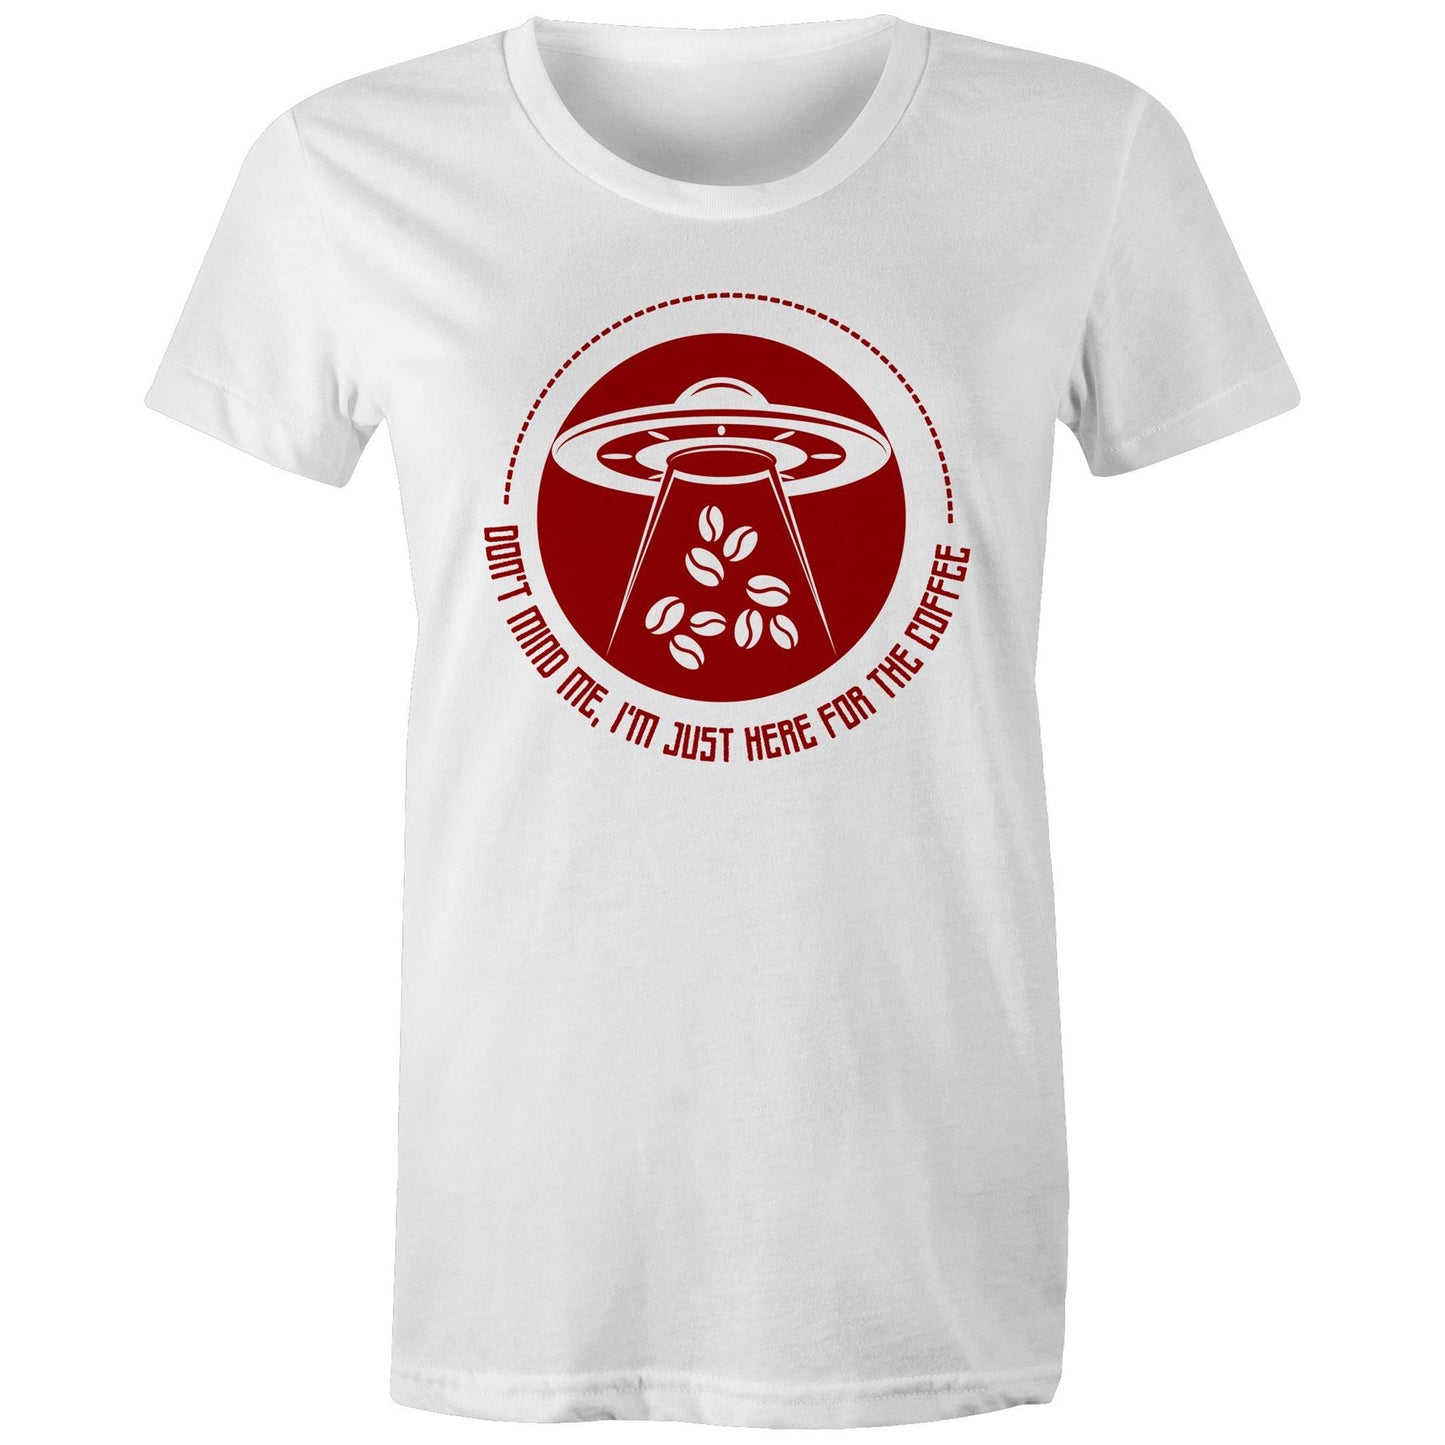 Don't Mind Me, I'm Just Here For The Coffee, Alien UFO - Womens T-shirt White Womens T-shirt Coffee Sci Fi